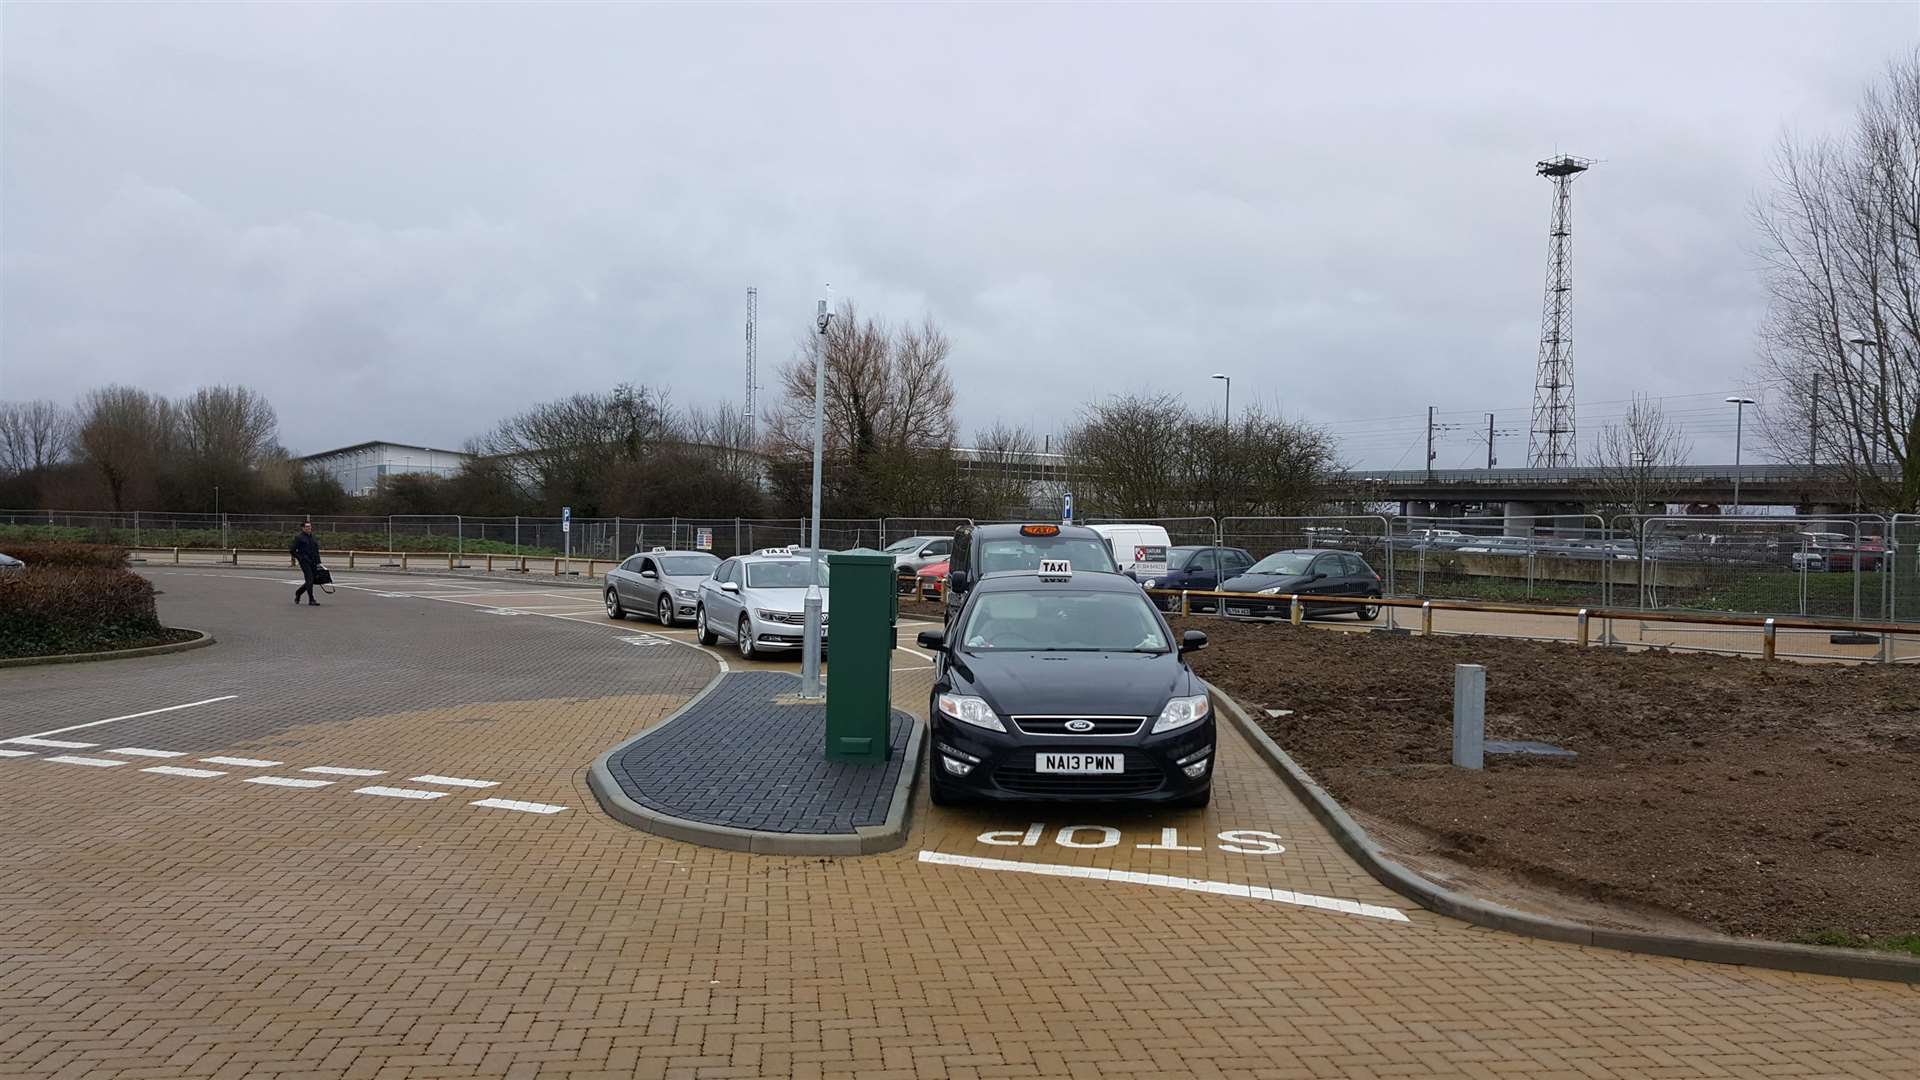 The area where taxis have to wait in the Stour Centre car park